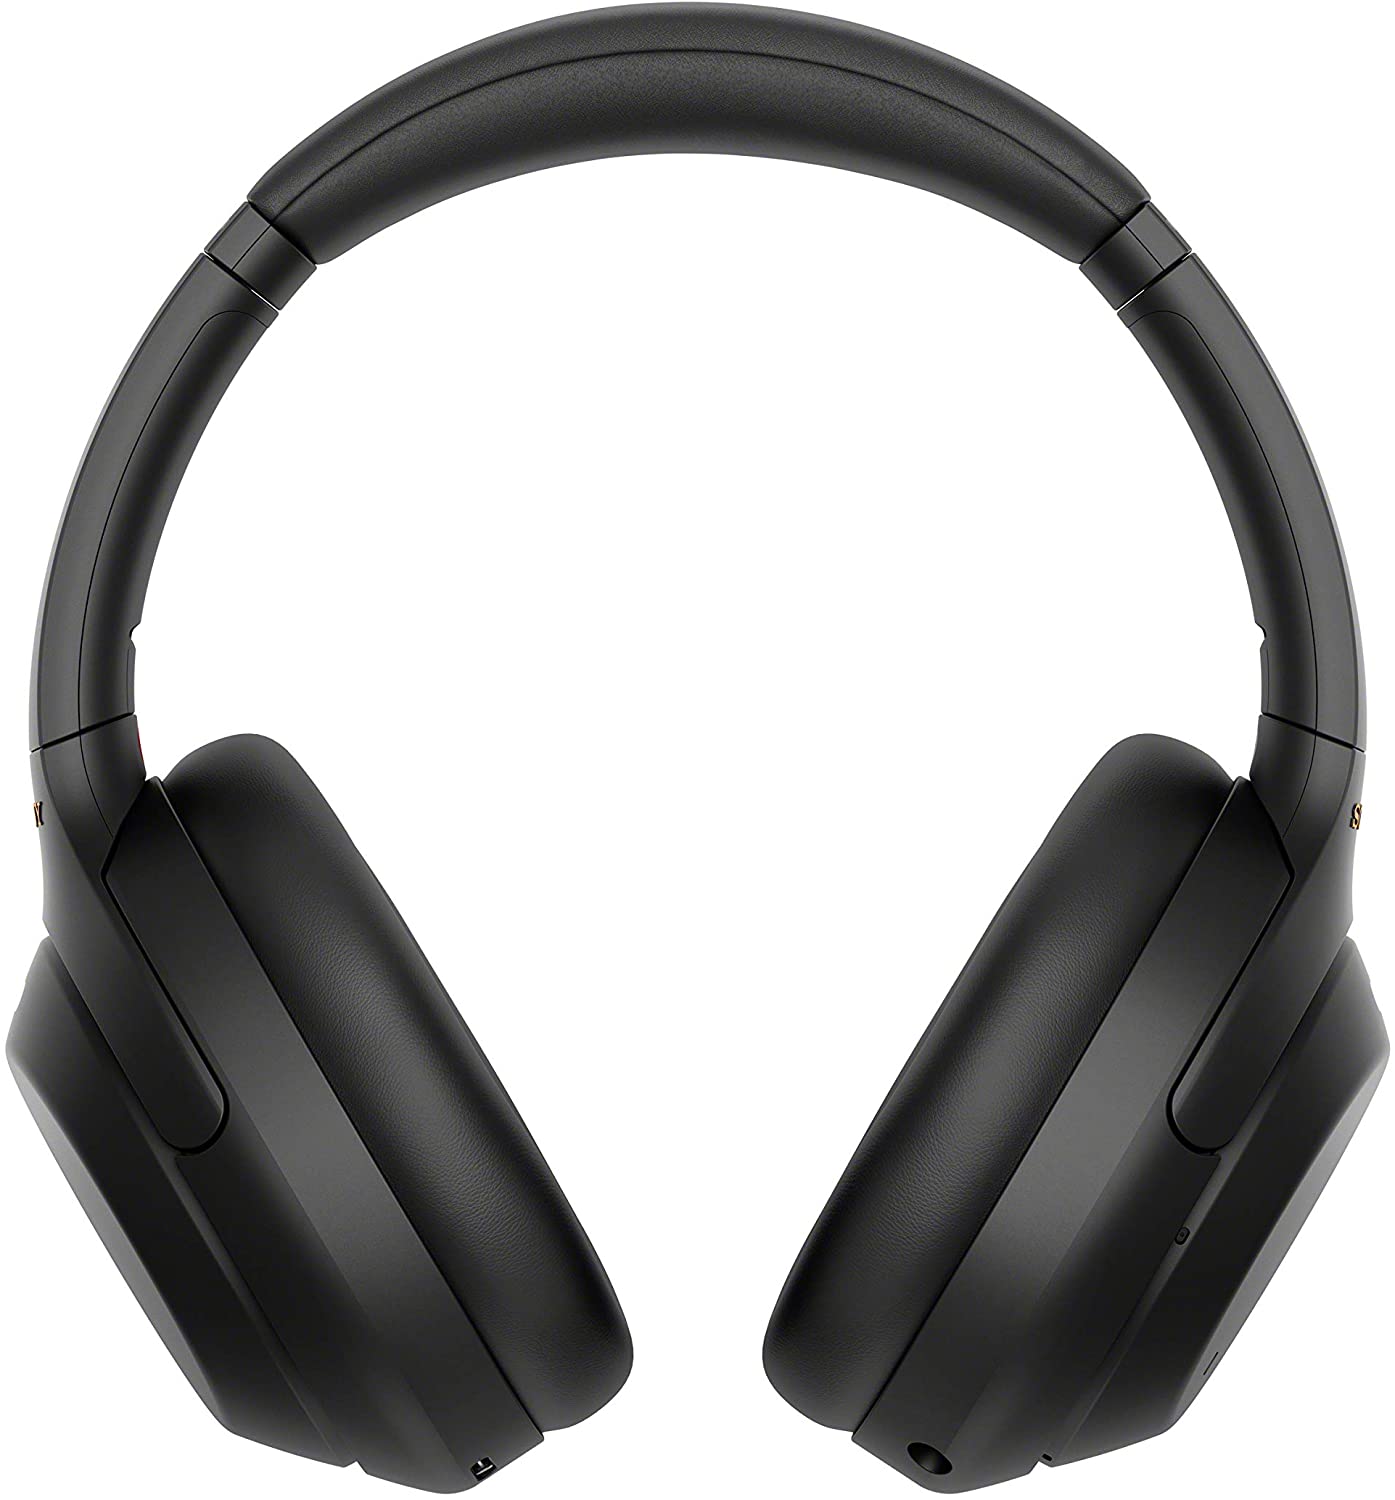 The new Sony WH1000XM4 headphones bring ANC, fast pair, and more for